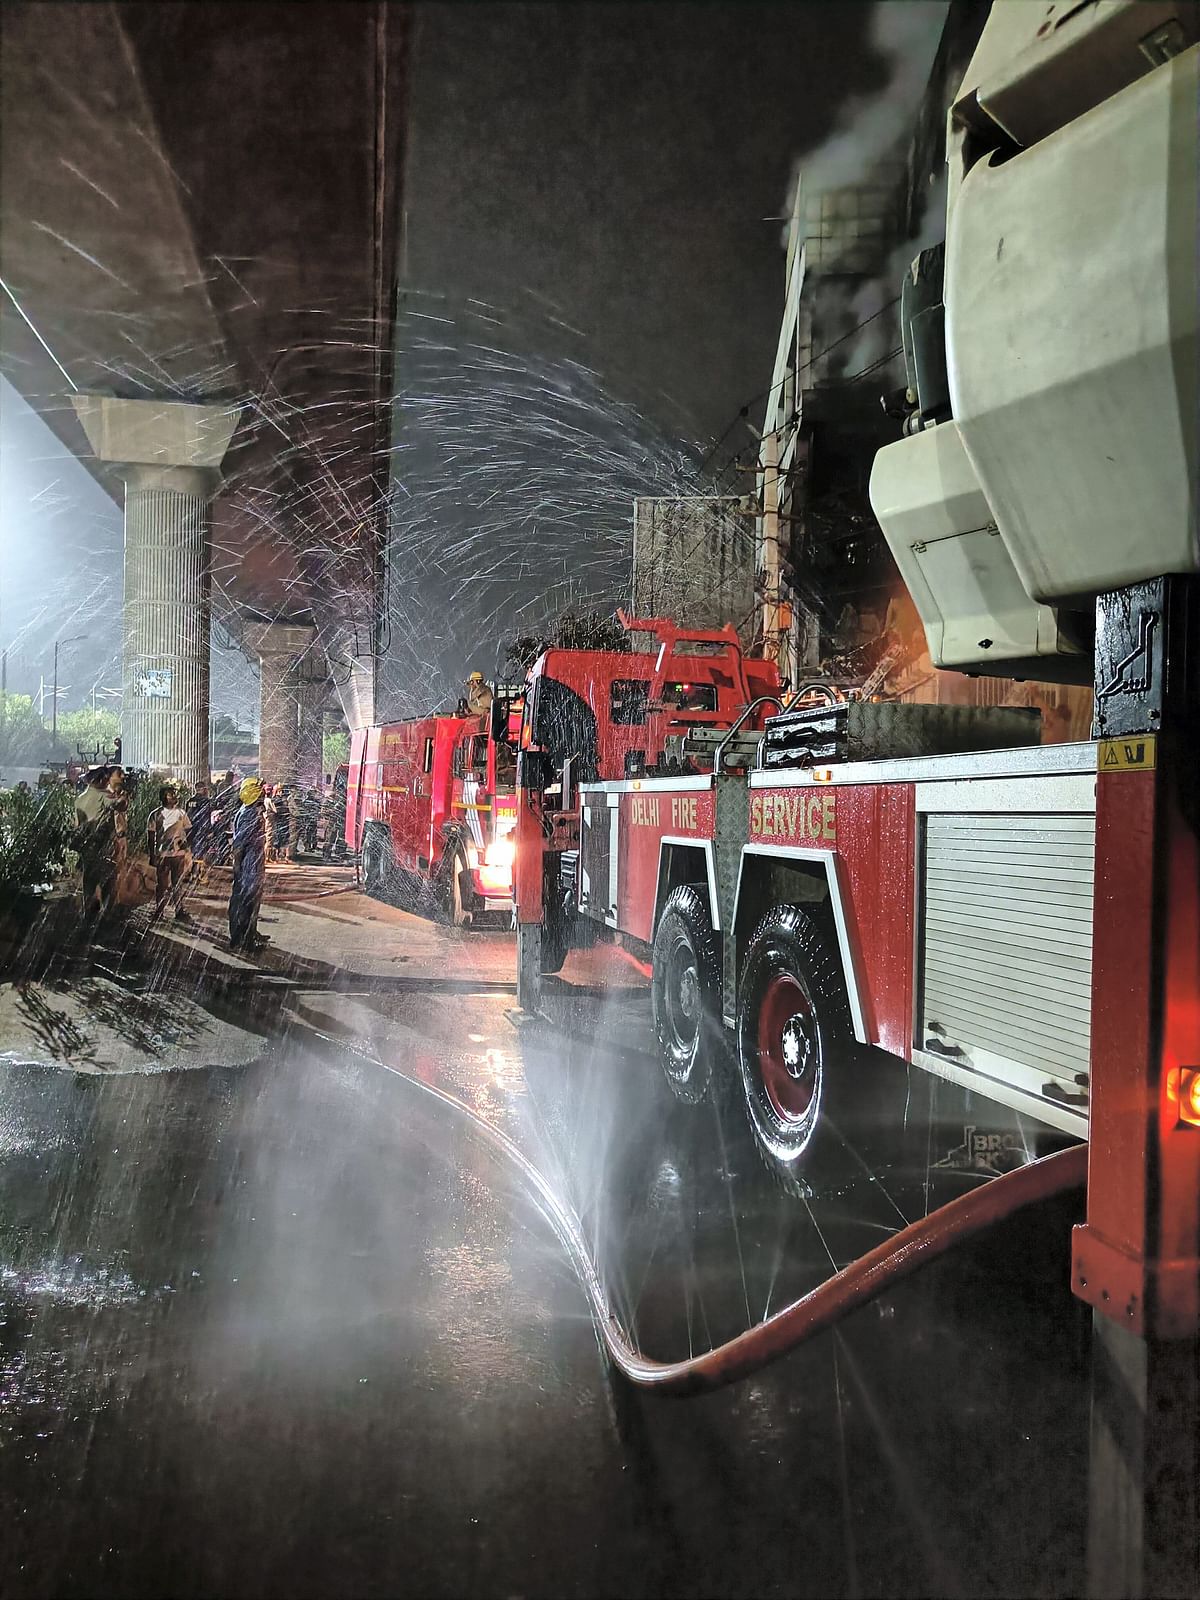 At least 27 people were killed in a major fire that broke out at a building near Mundka Metro Station.